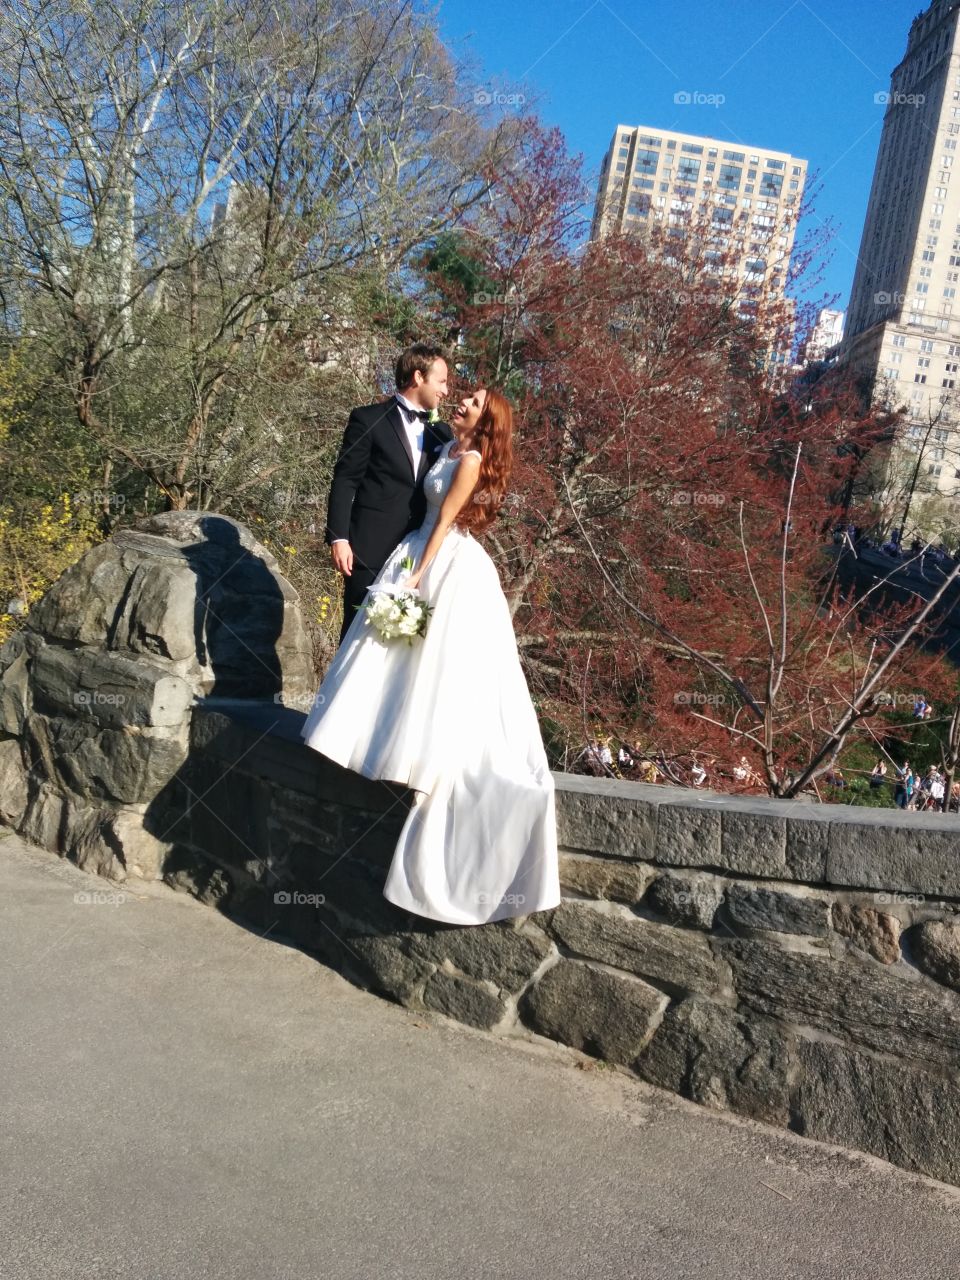 Spring doves. While strolling Central Park, New York, this newly wed couple stood on Gapstow bridge brick railing. 